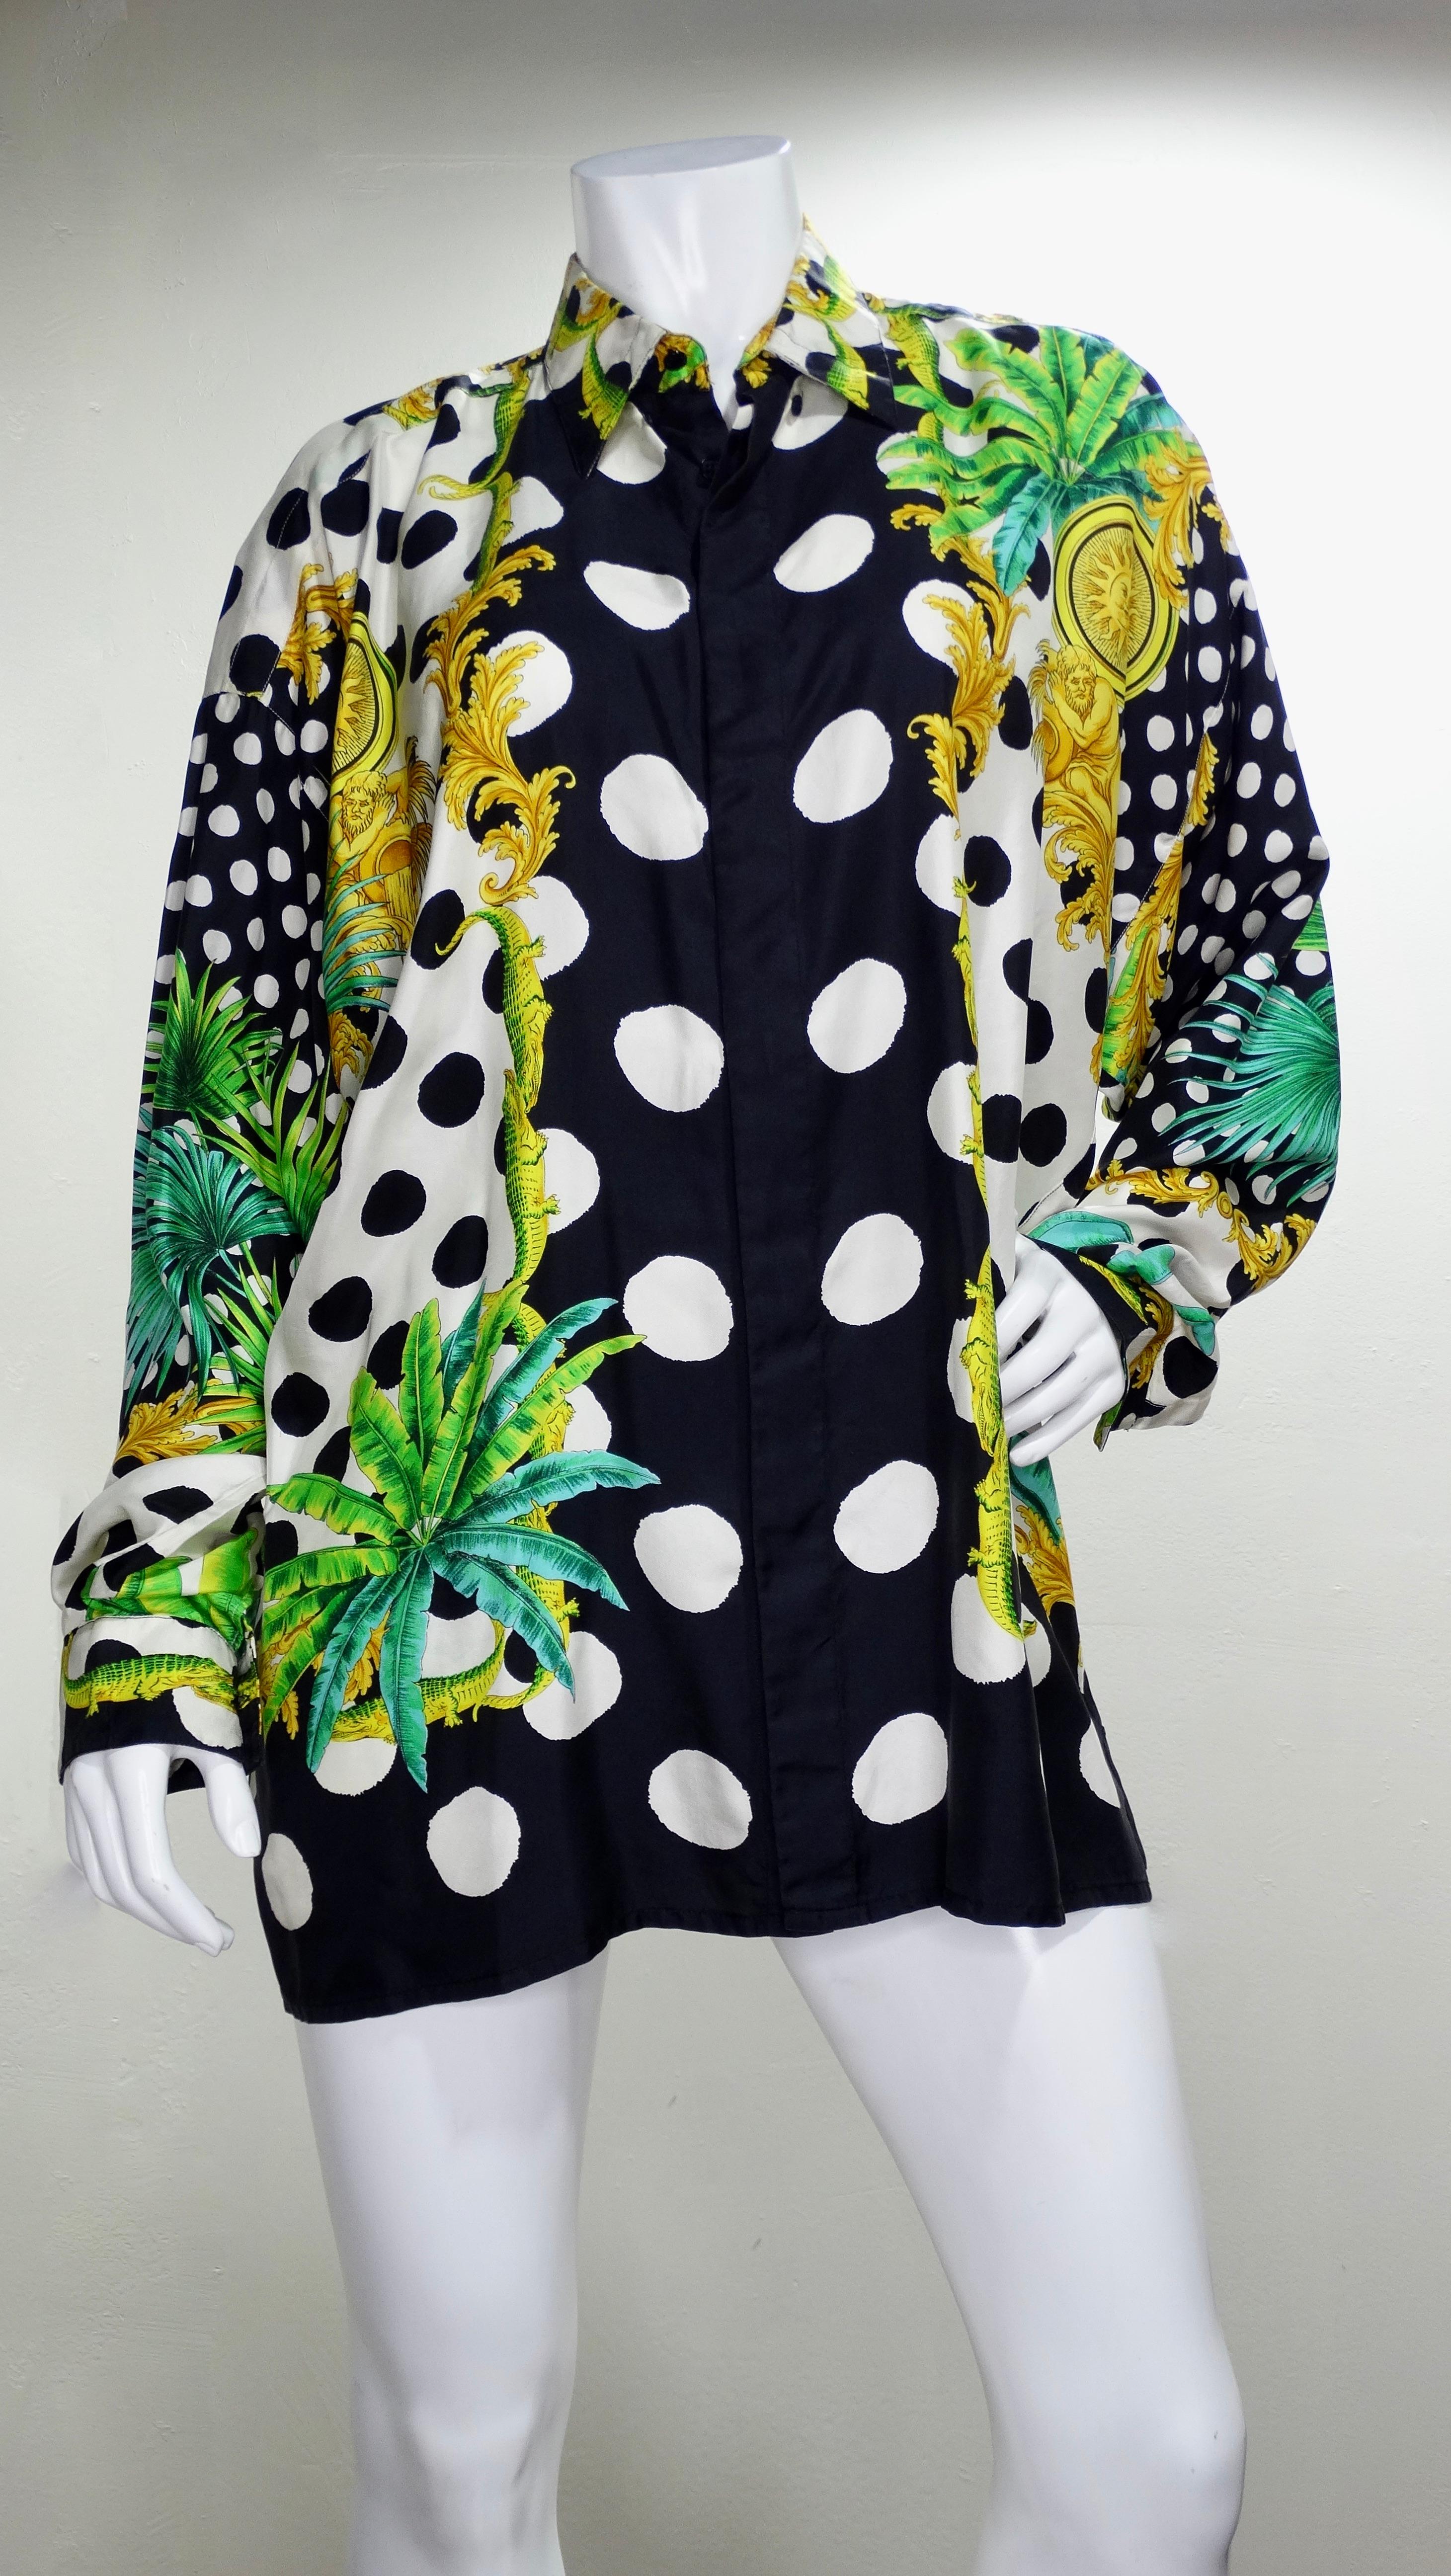 Snag yourself a piece from the Versace archives! Circa 1993, this silk shirt features a contrasting black and white polka dot motif with crocodiles, palm fronds, celestial sun medallions, and the signature Versace Baroque designs. Classic and